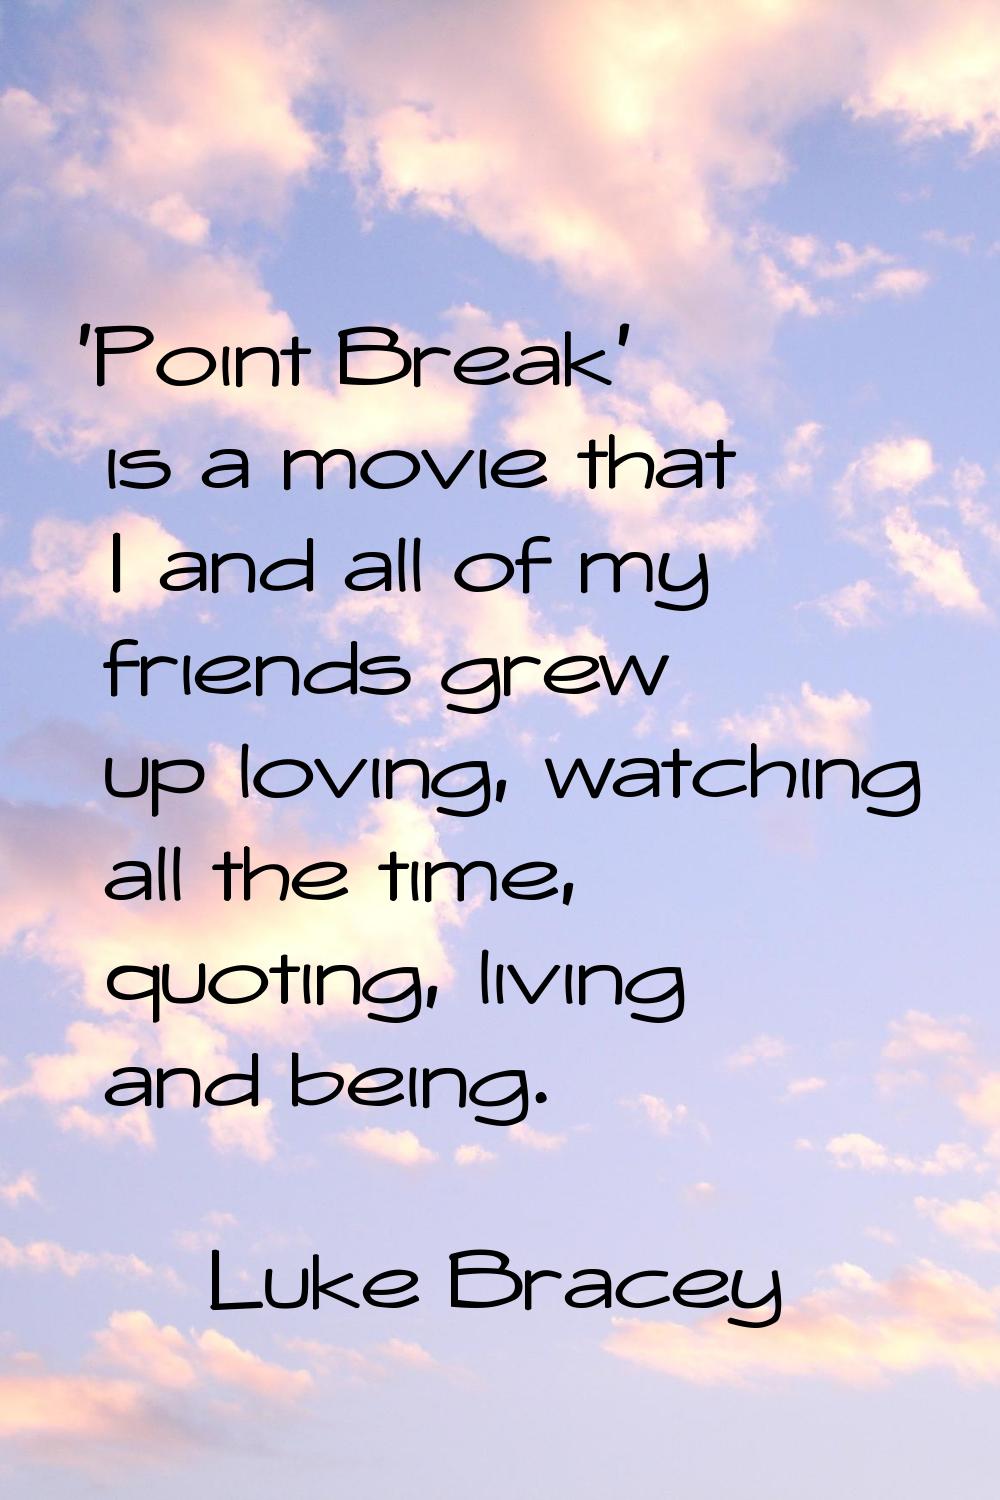 'Point Break' is a movie that I and all of my friends grew up loving, watching all the time, quotin